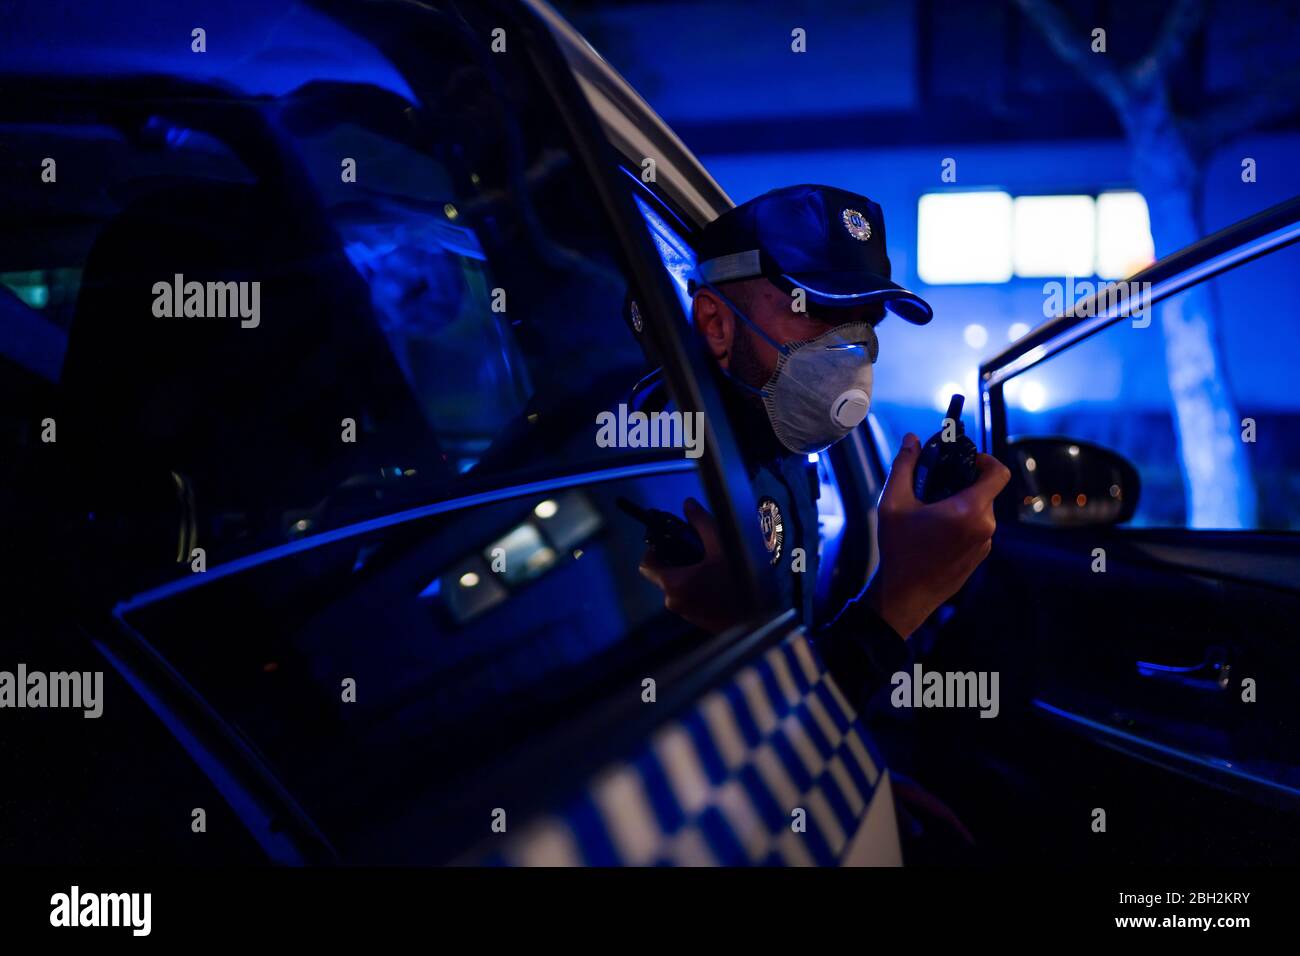 Policeman on emergency mission, using phone Stock Photo